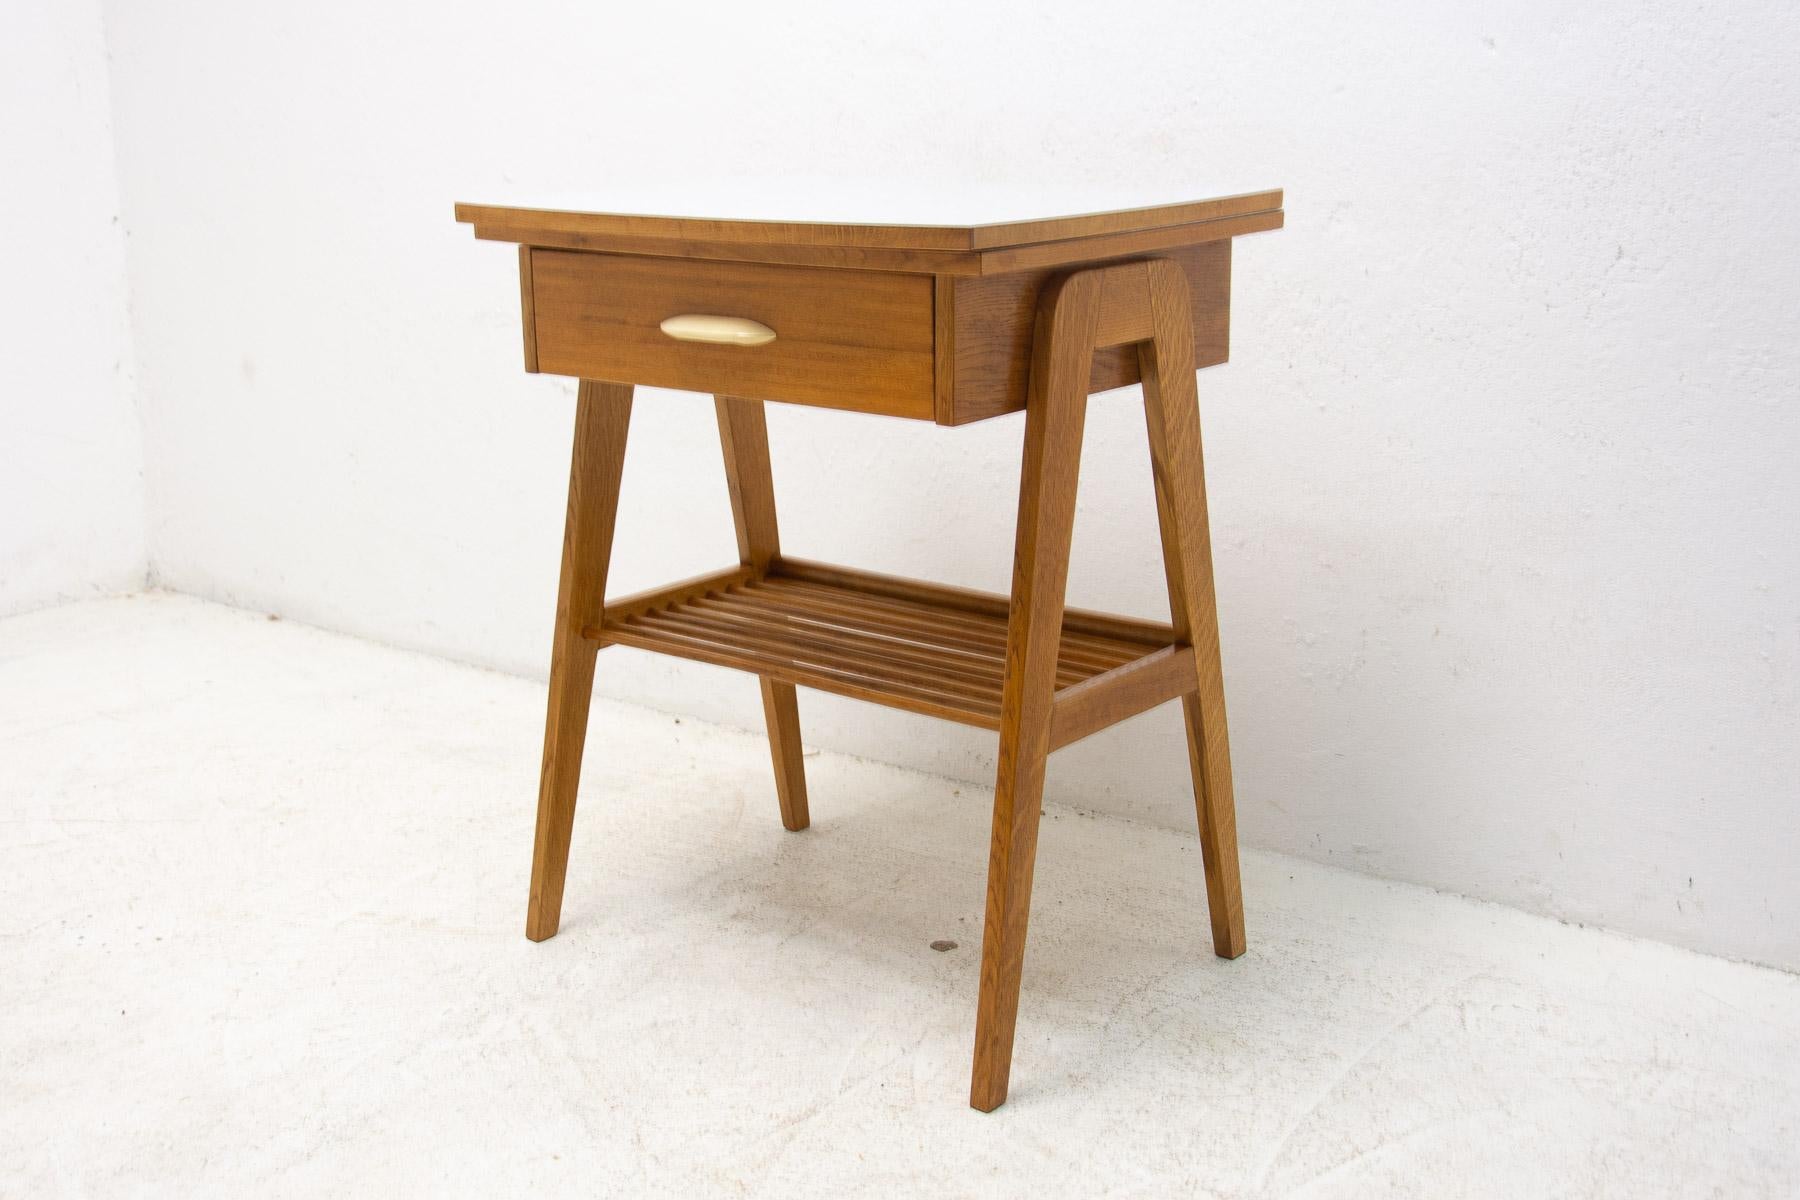 Mid-century positioning TV table. It features a beech wood or ash wood structure, one drawer and a formica table top.

In good vintage condition, shows slight signs of age and using.

Measures: Height: 76 cm
Width: 60 cm
Depth: 48 cm.